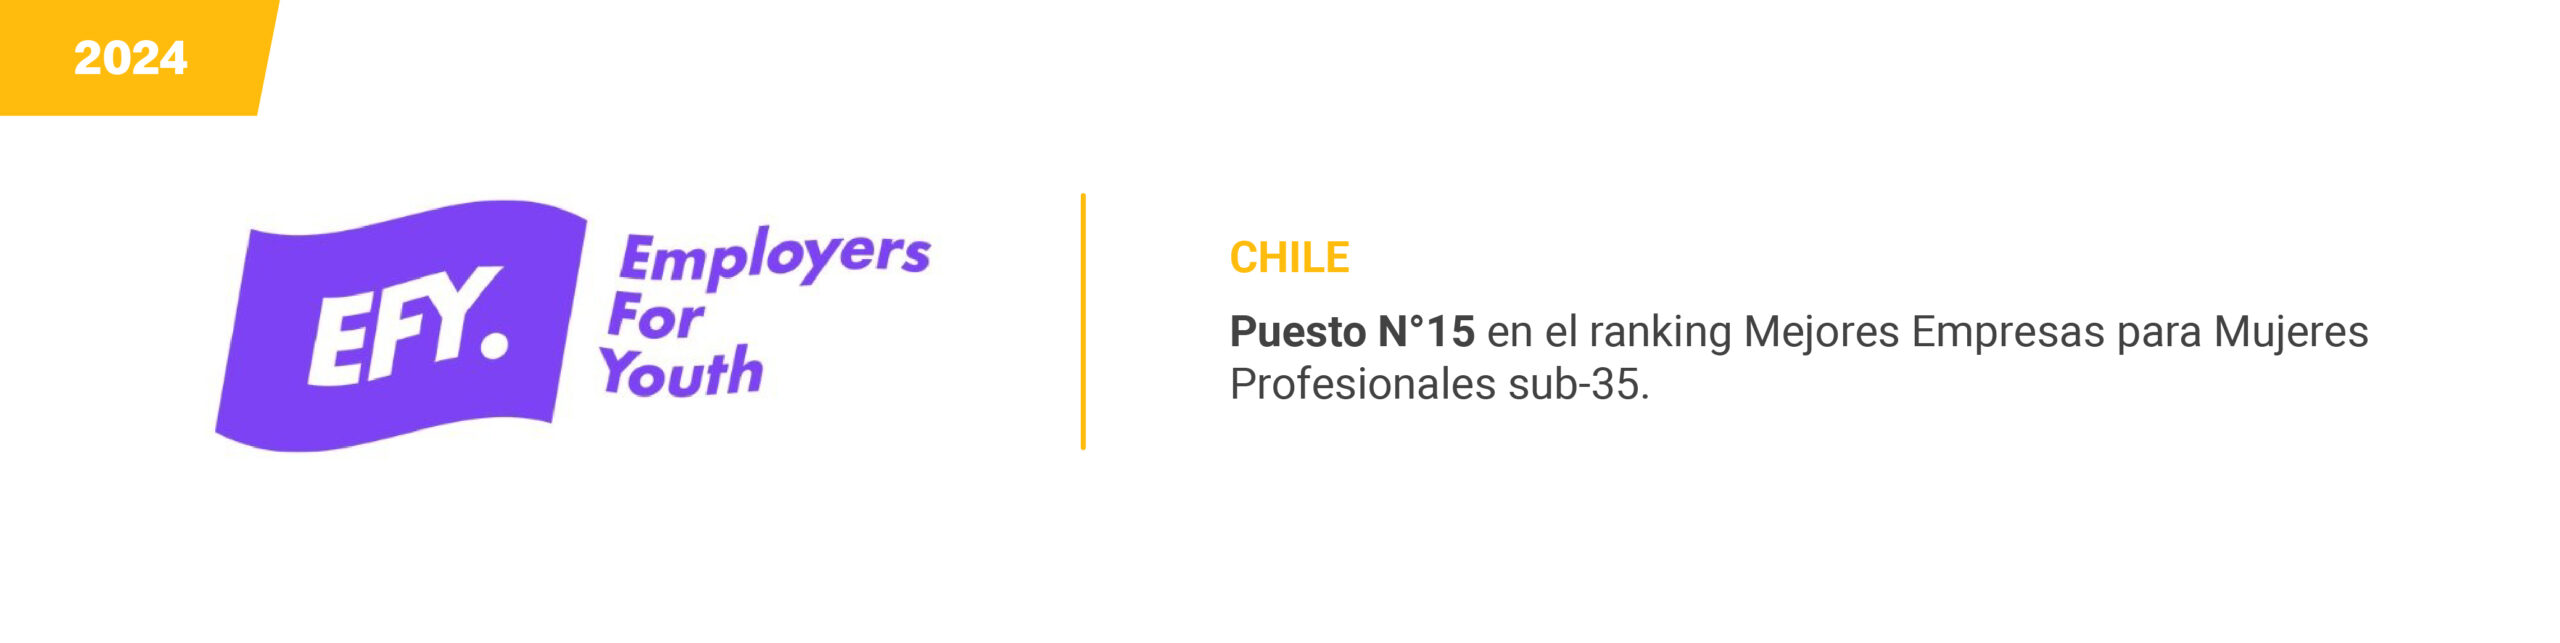 Employers for Youth - Chile 2024